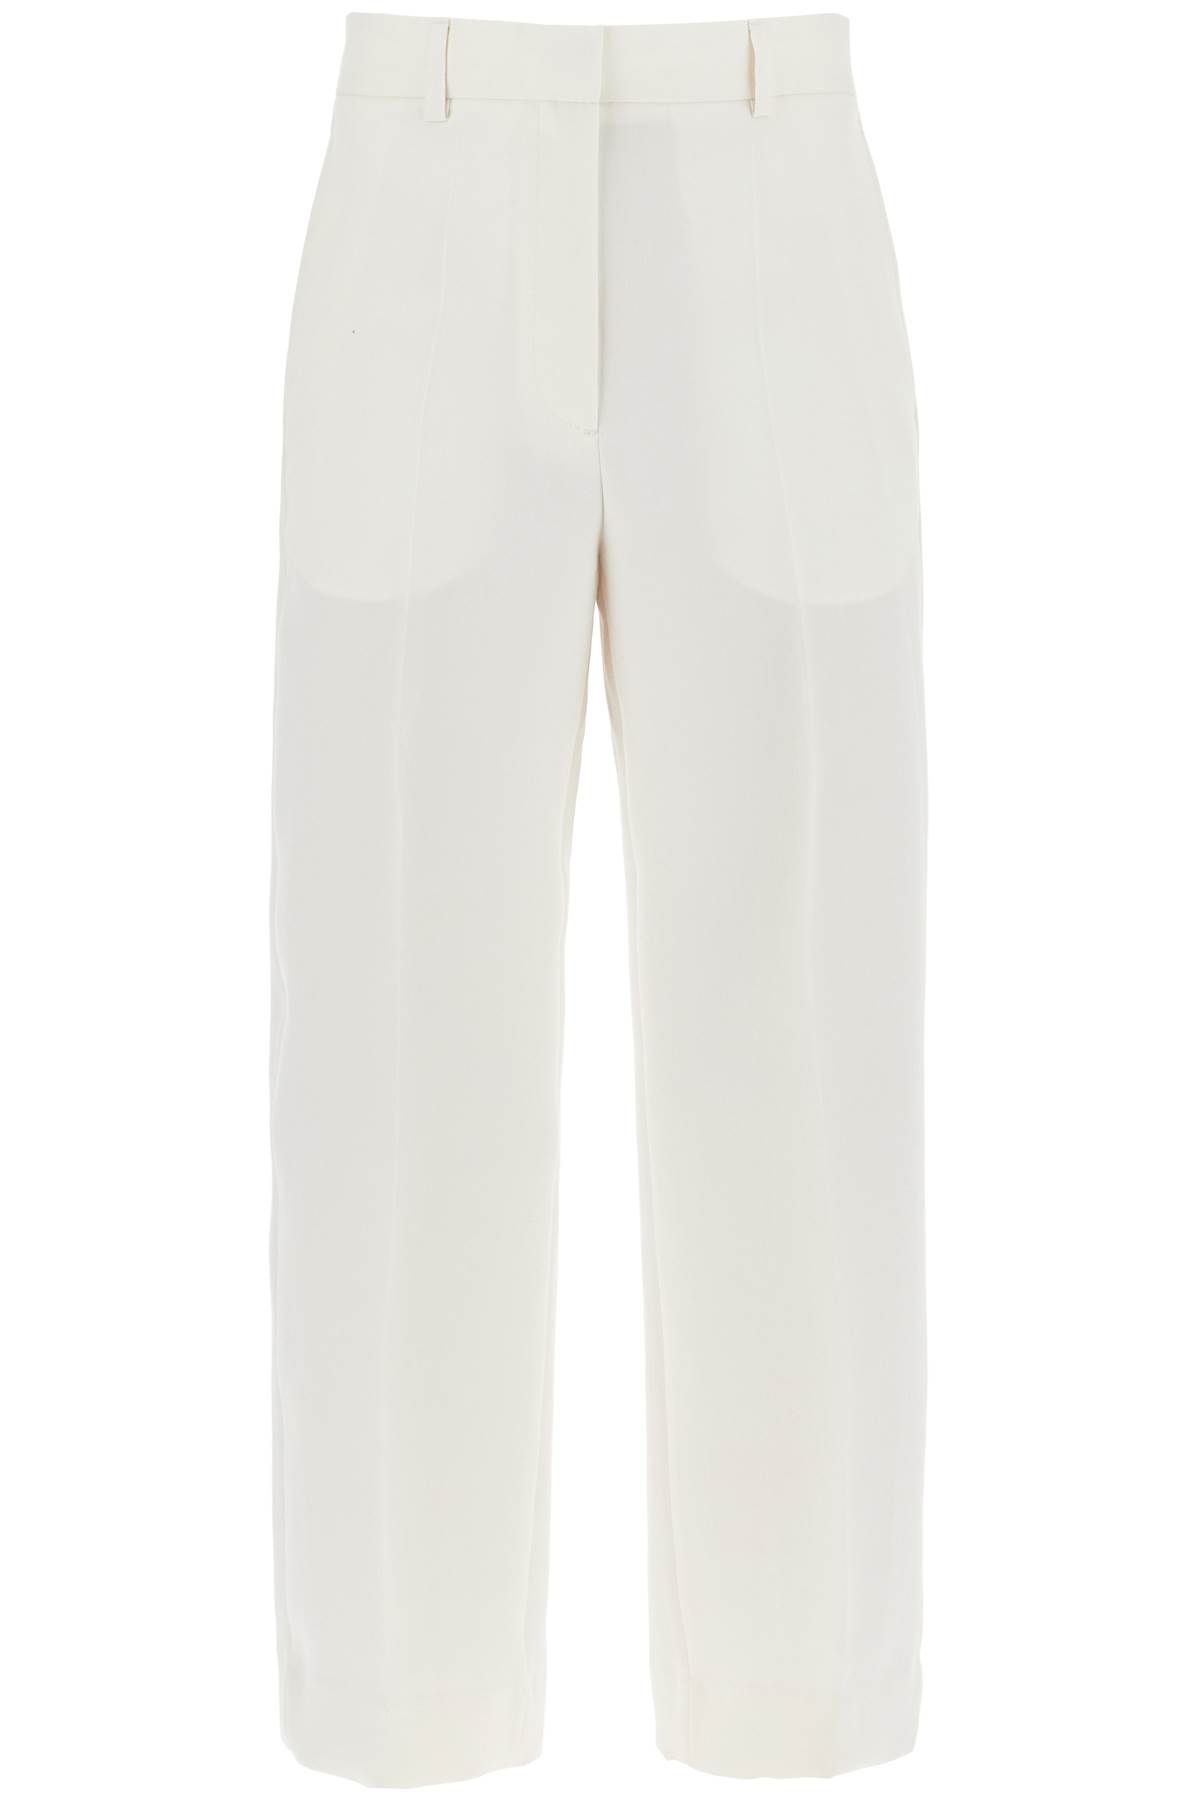 Toteme TOTEME cropped wool blend trousers